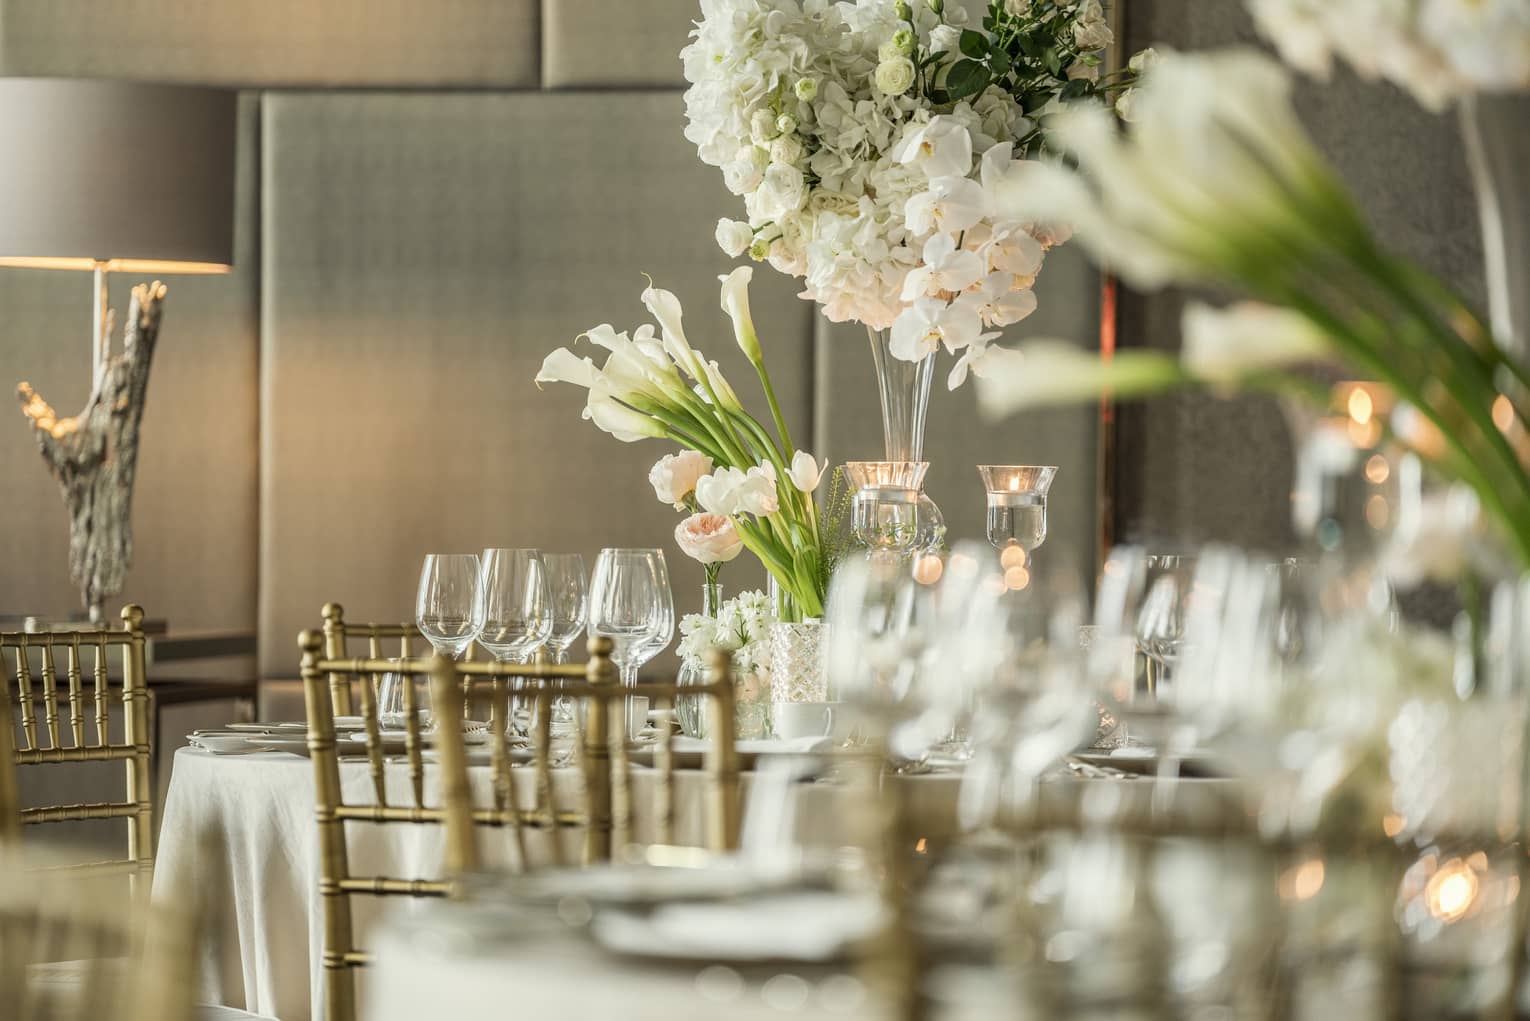 Close-up of empty wine glasses, vases with tall white flowers in Western Banquet room